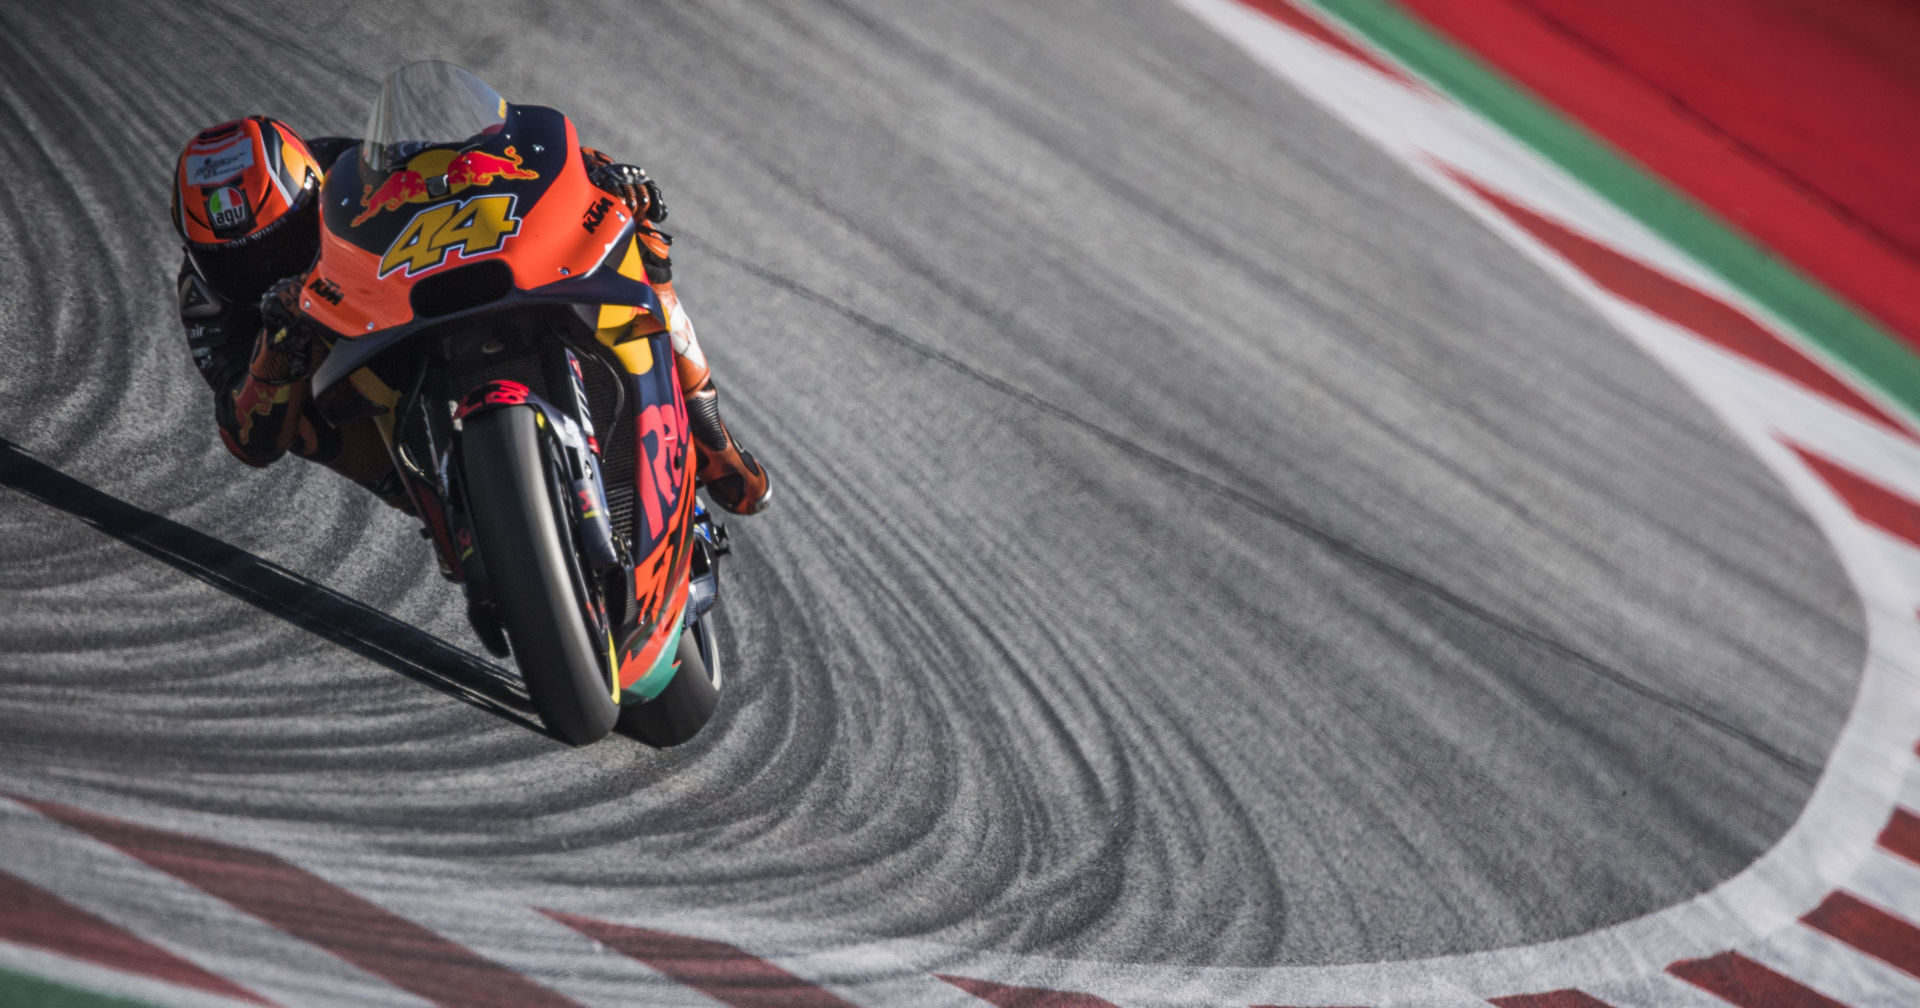 Pol Espargaro (44) will continue to lead Red Bull KTM's factory MotoGP team, but he will get a new teammate in 2020. Photo courtesy of KTM Images.